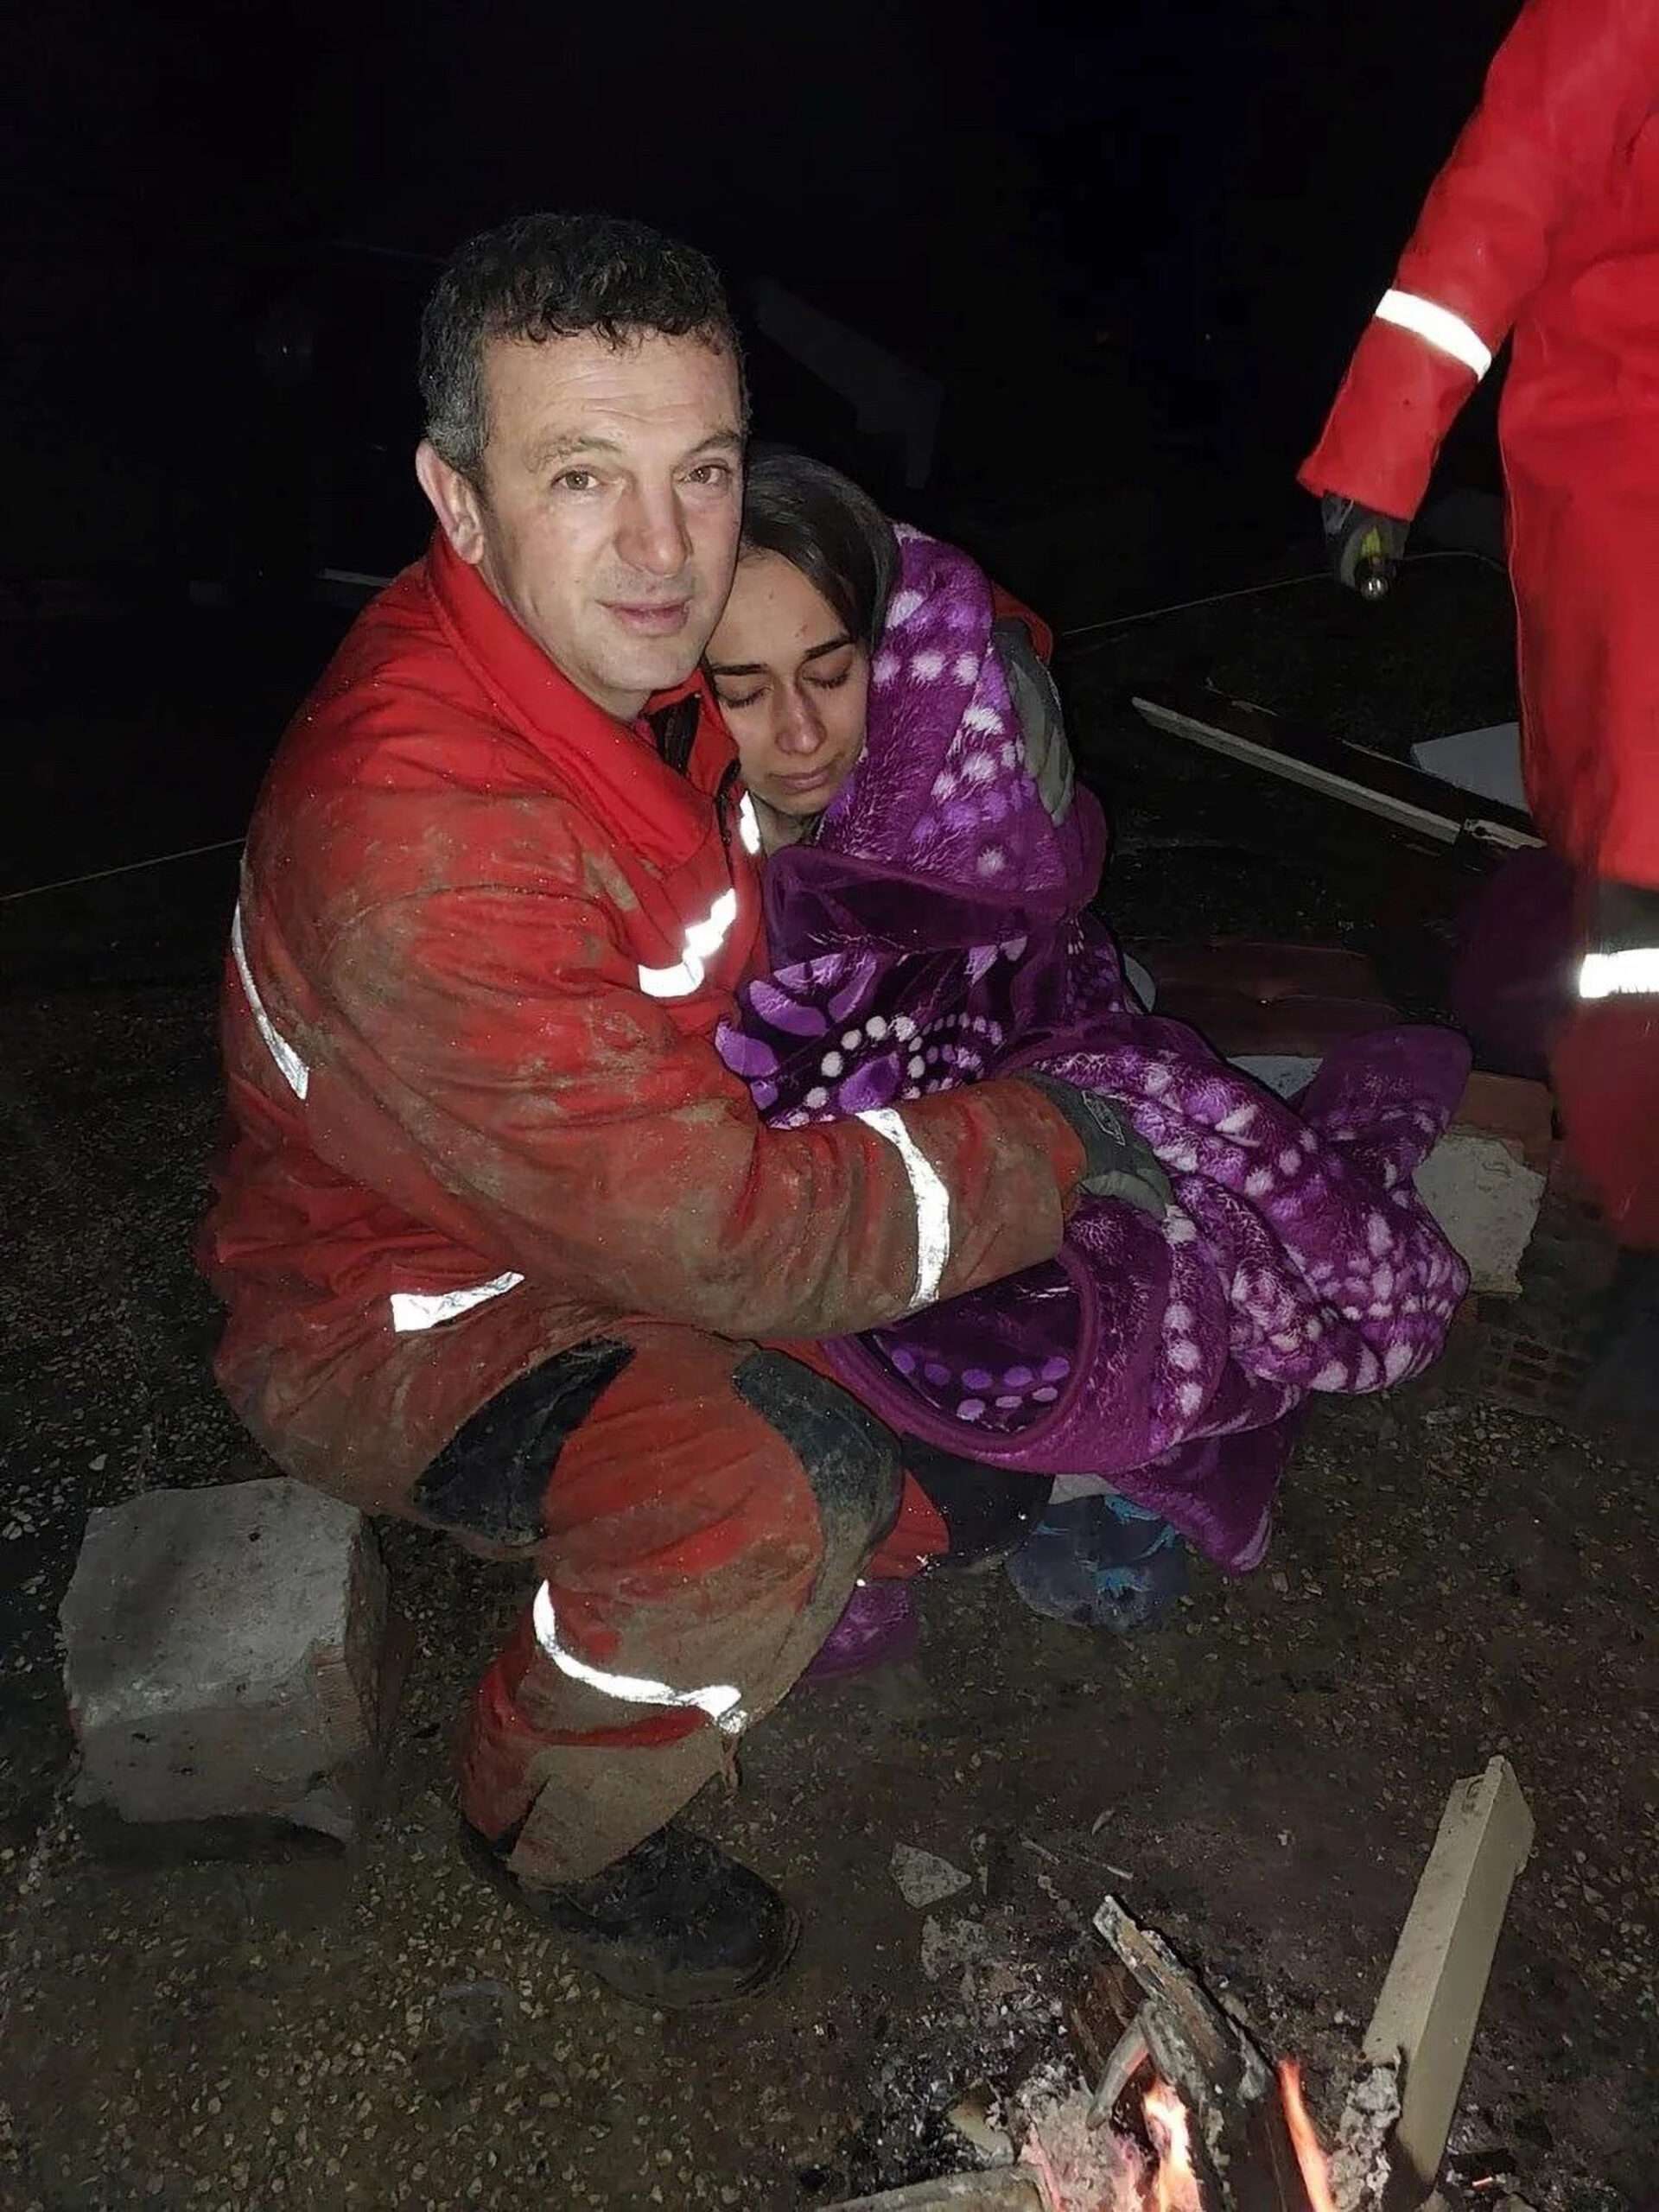 Read more about the article TEEN GIRL’S TEARS AT QUAKE RESCUE: Dramatic Moment Girl Bursts Into Tears As Firefighters Pull Her From Rubble